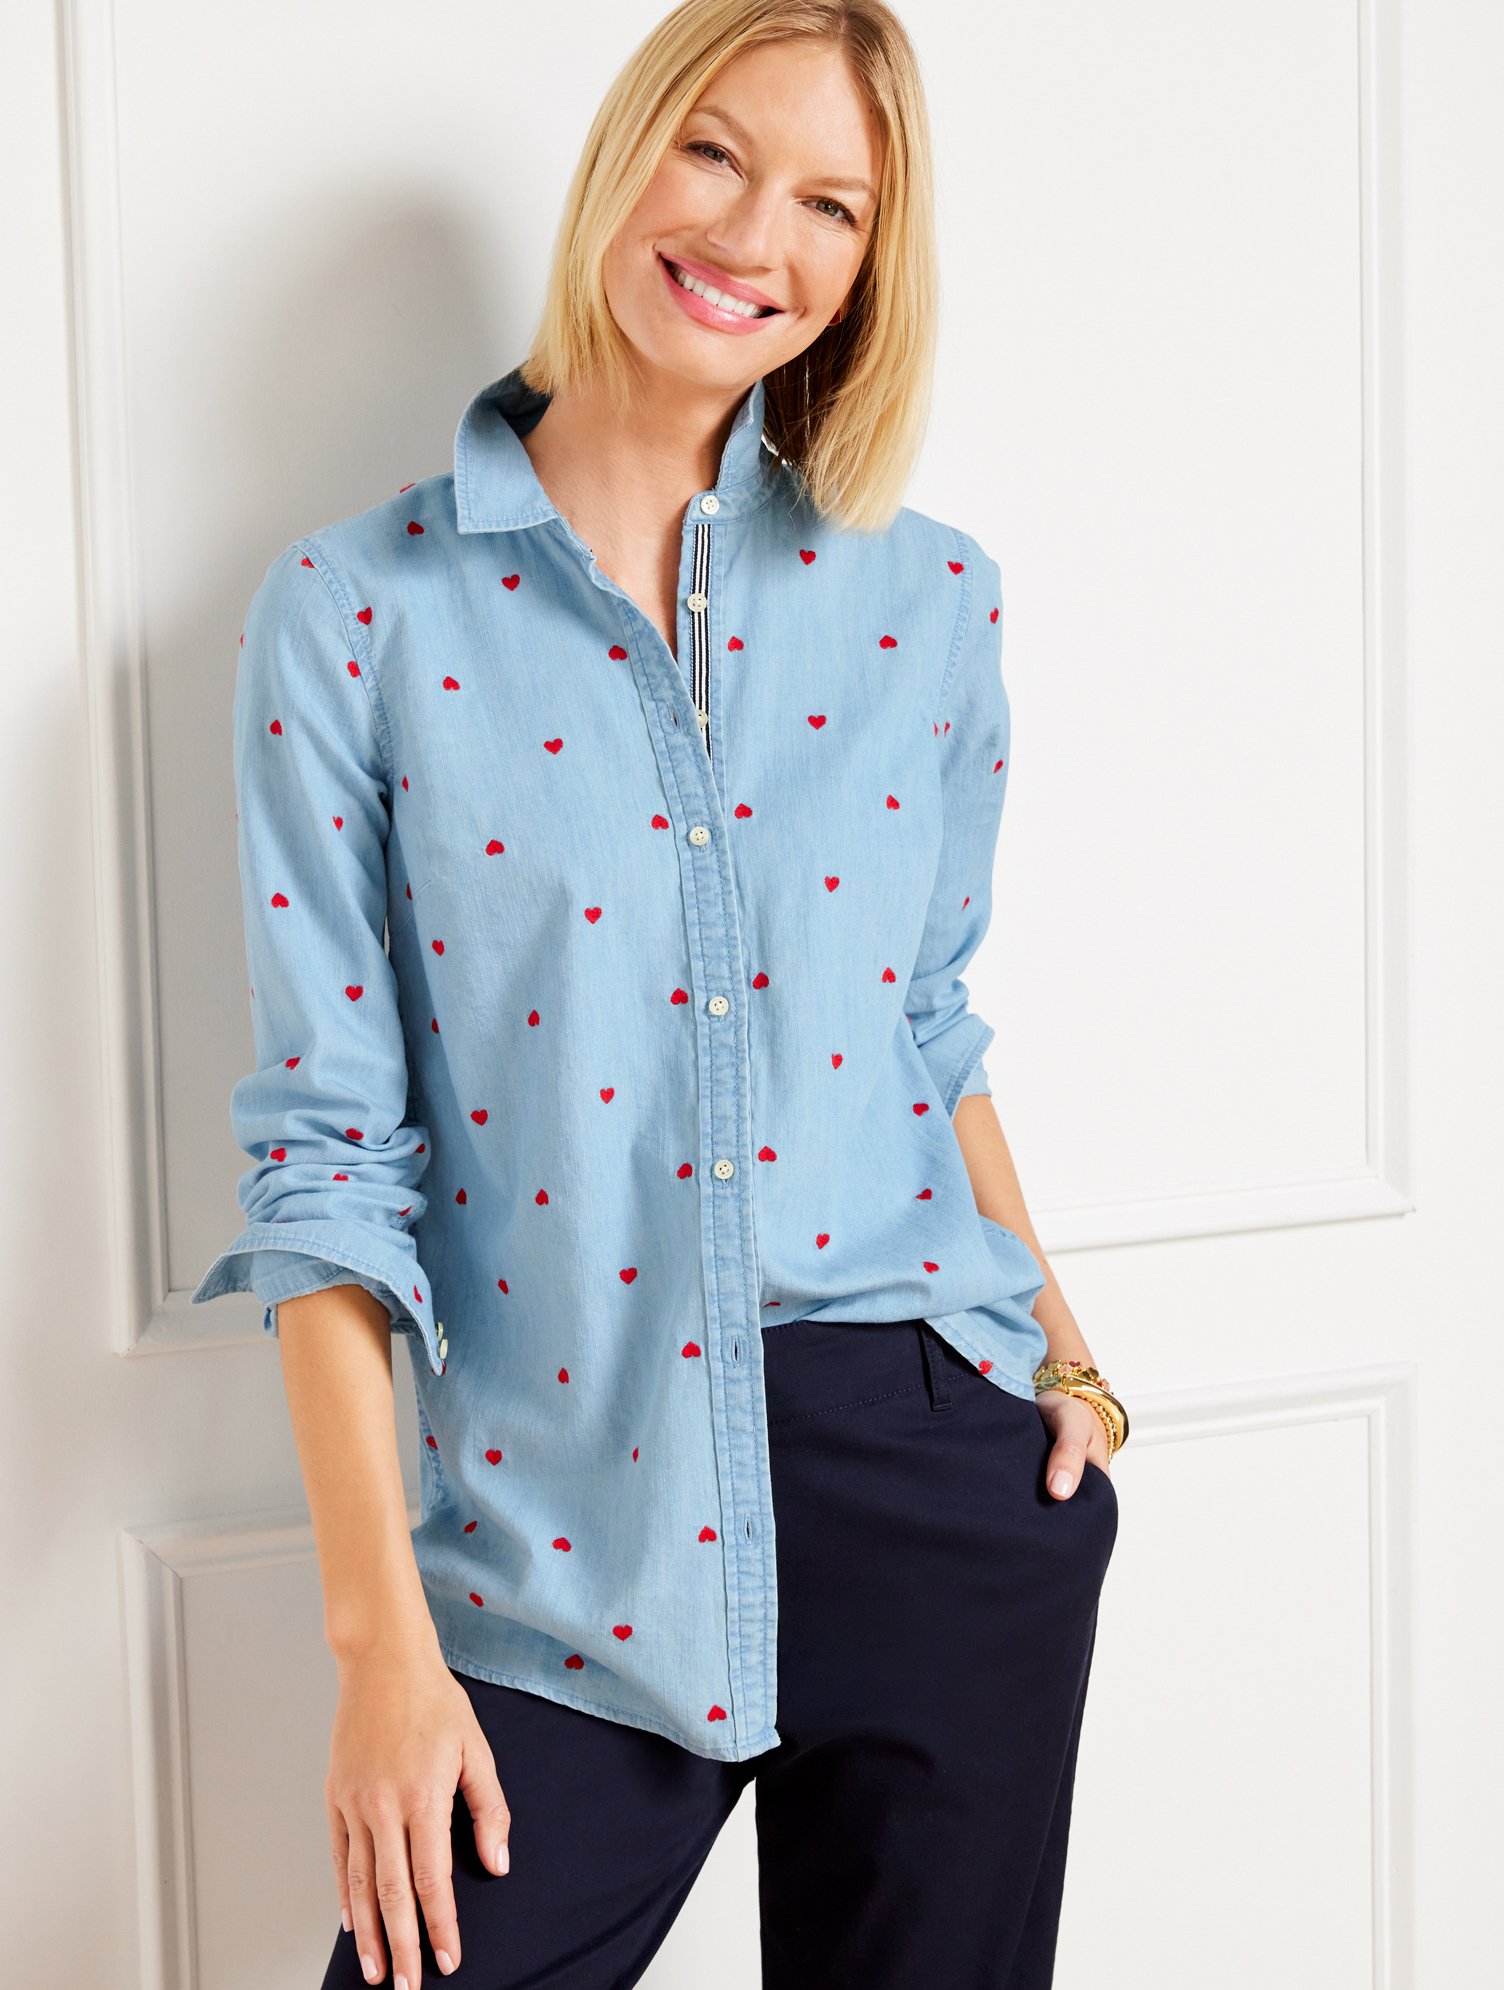 Talbots Petite - Denim Button Front Shirt - Embroidered Hearts - Light Blue/red - Medium - 100% Cotton Talbo In Light Blue,red